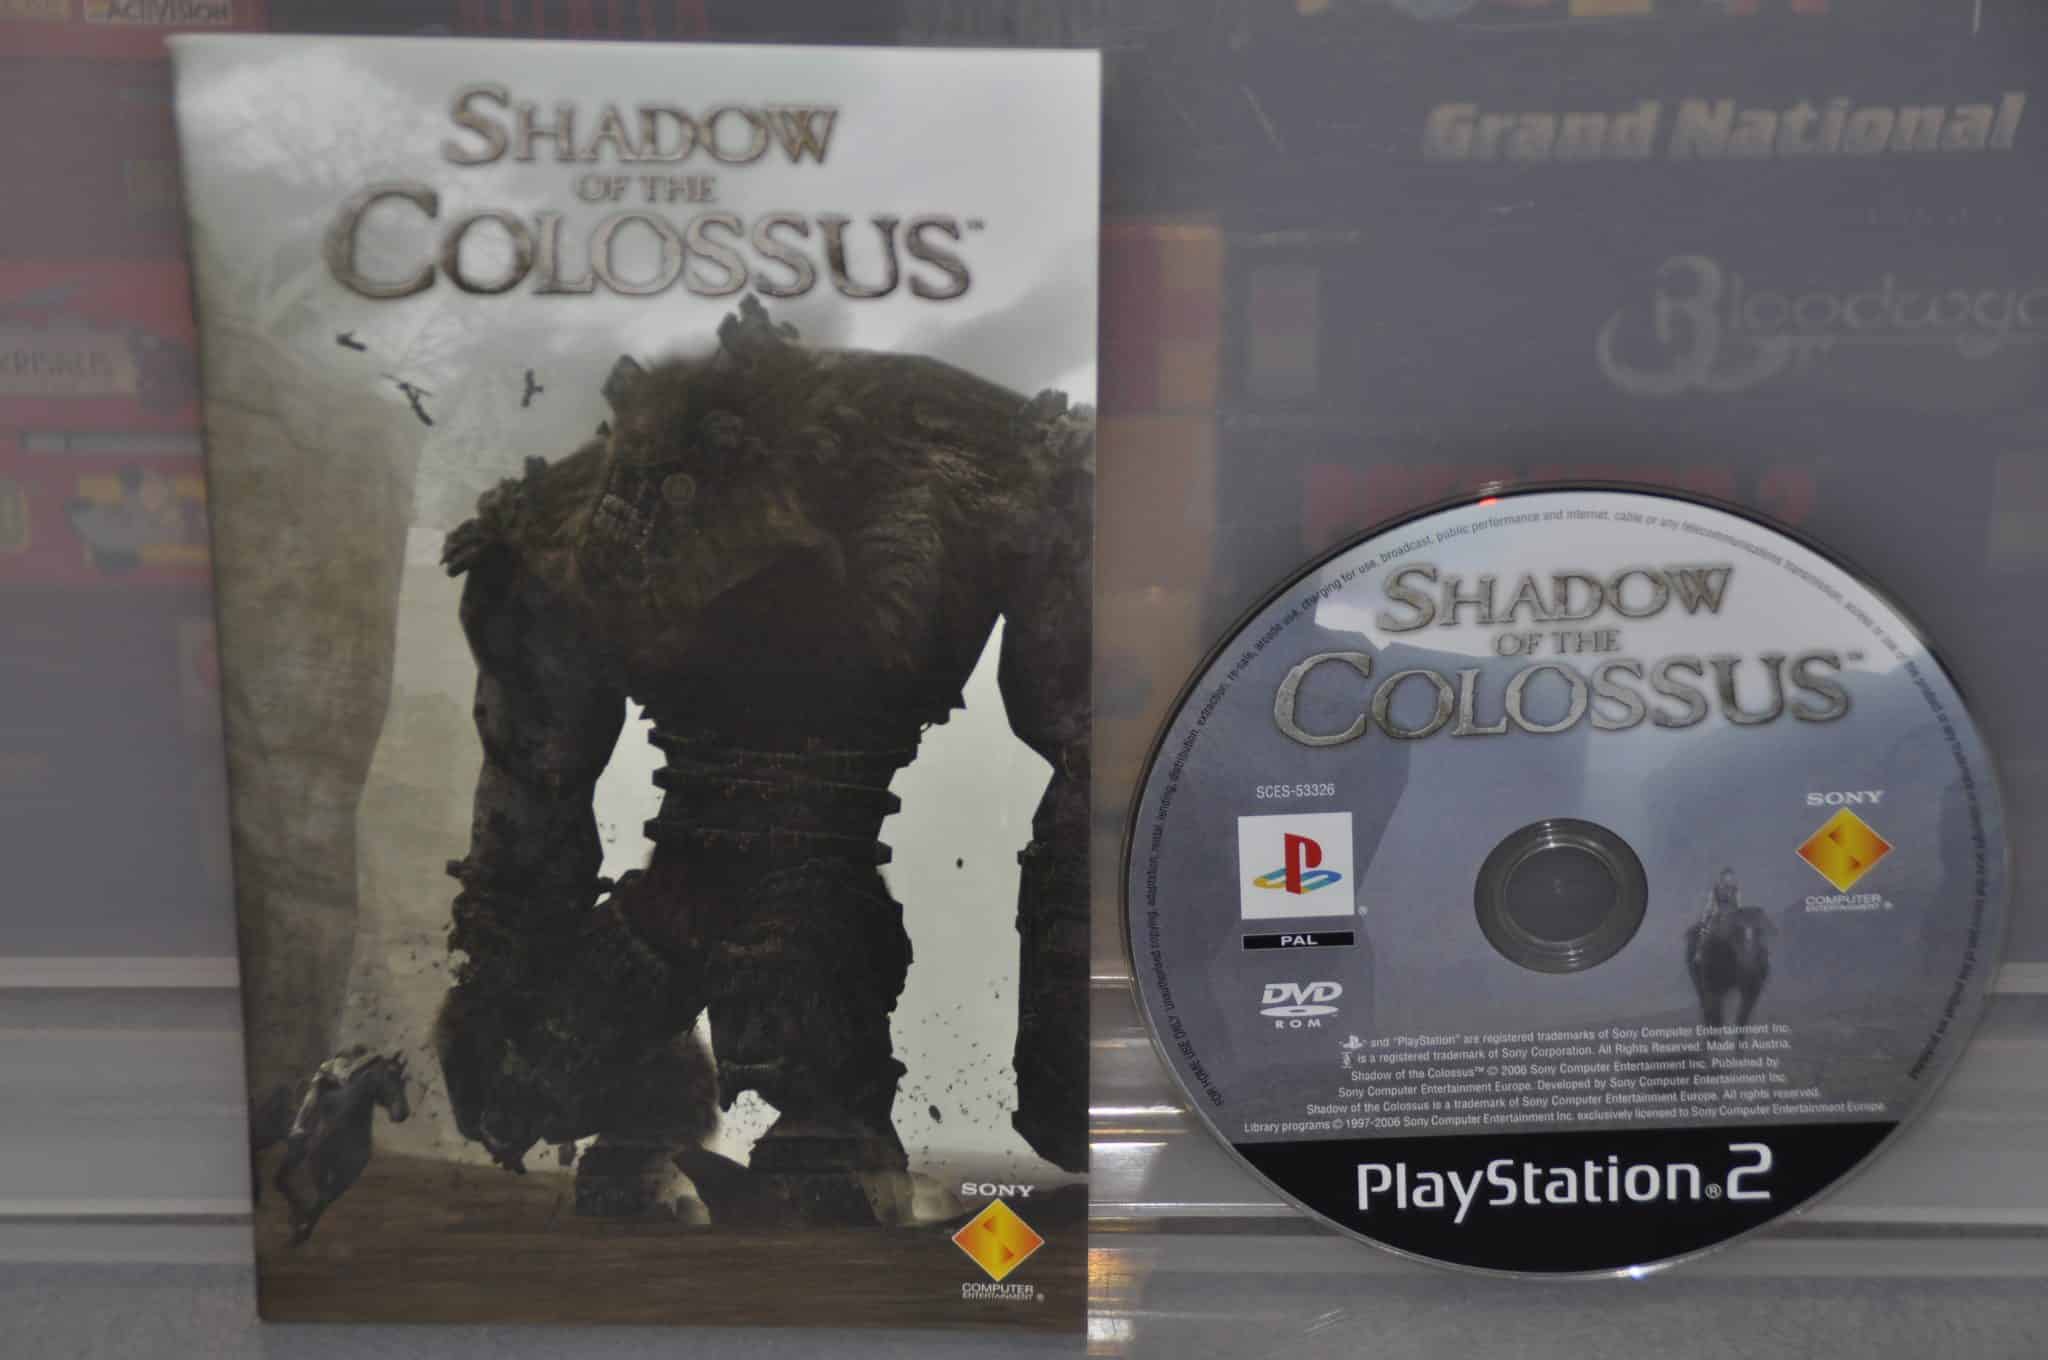 Shadow of the Colossus Sony PlayStation 2 limited edition ps2 pal,version